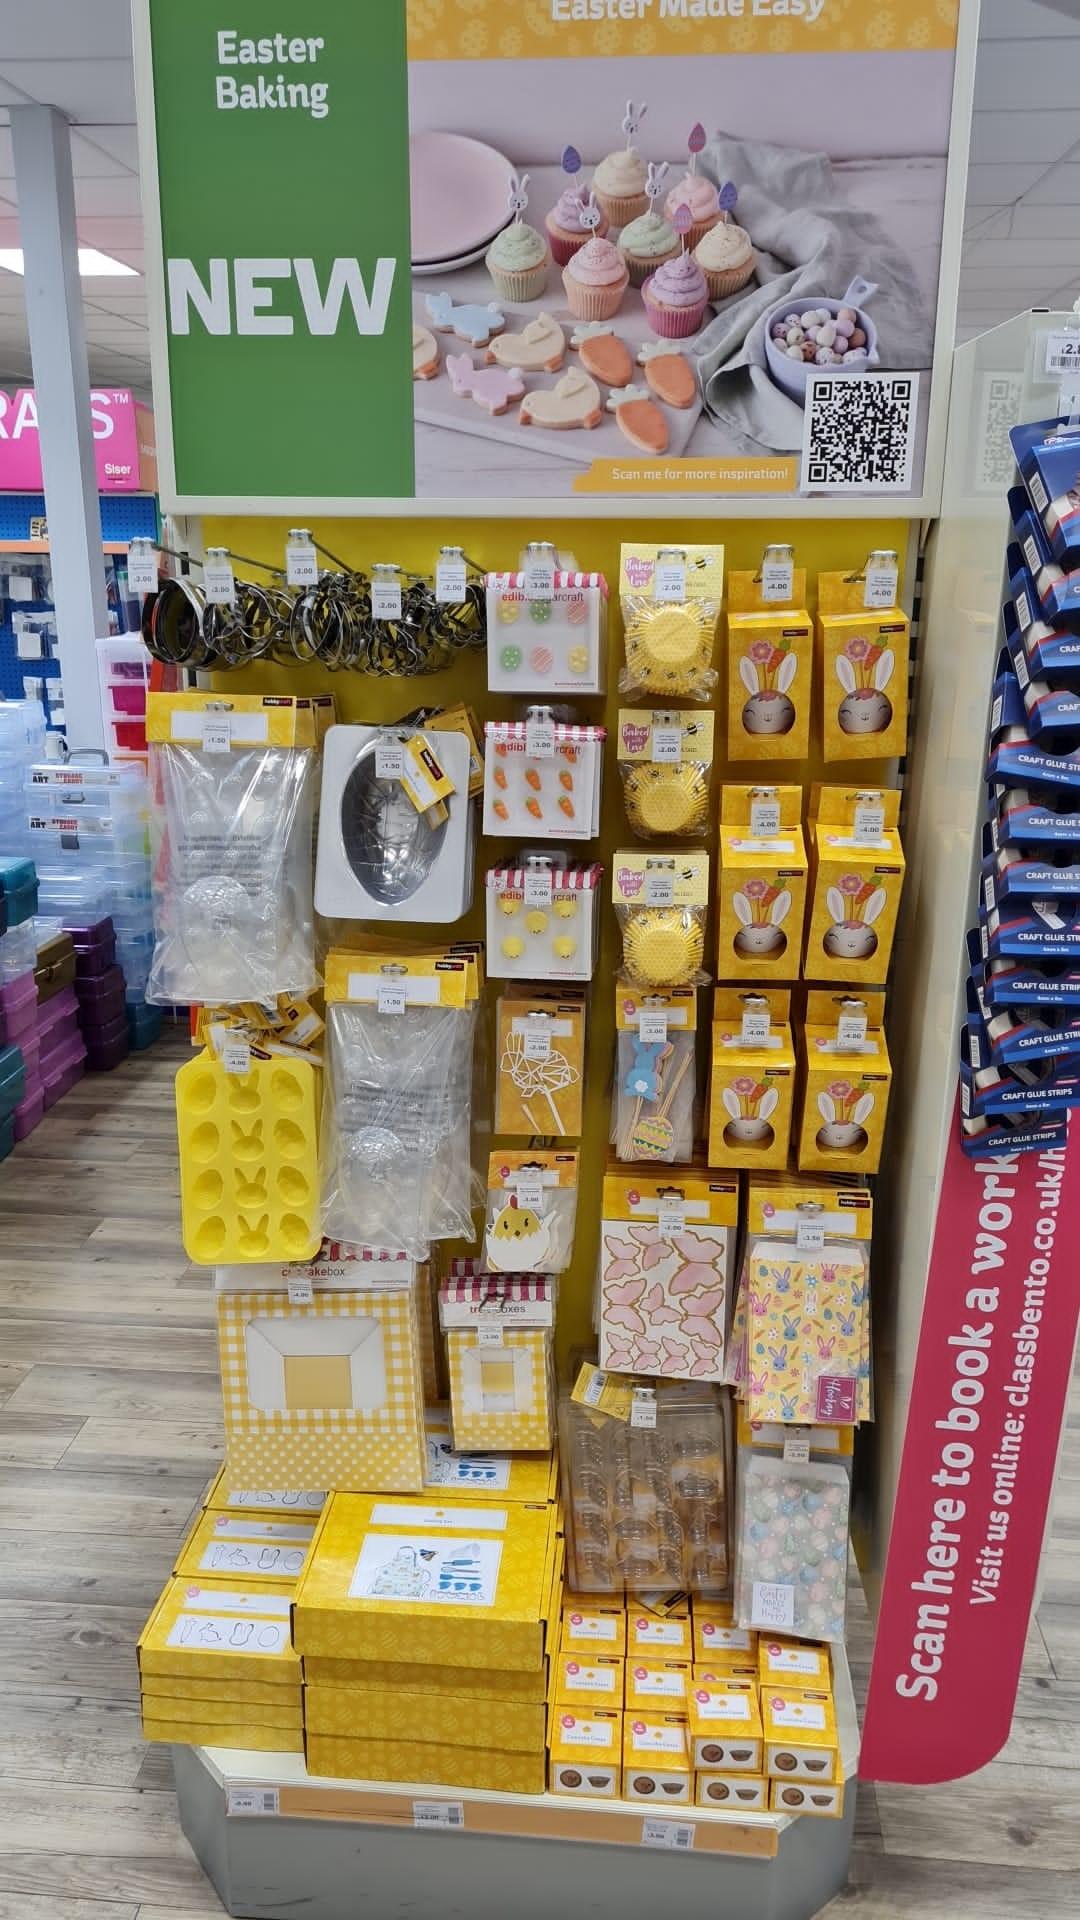 Hobbycraft goes green for Easter - A1 Retail Magazine